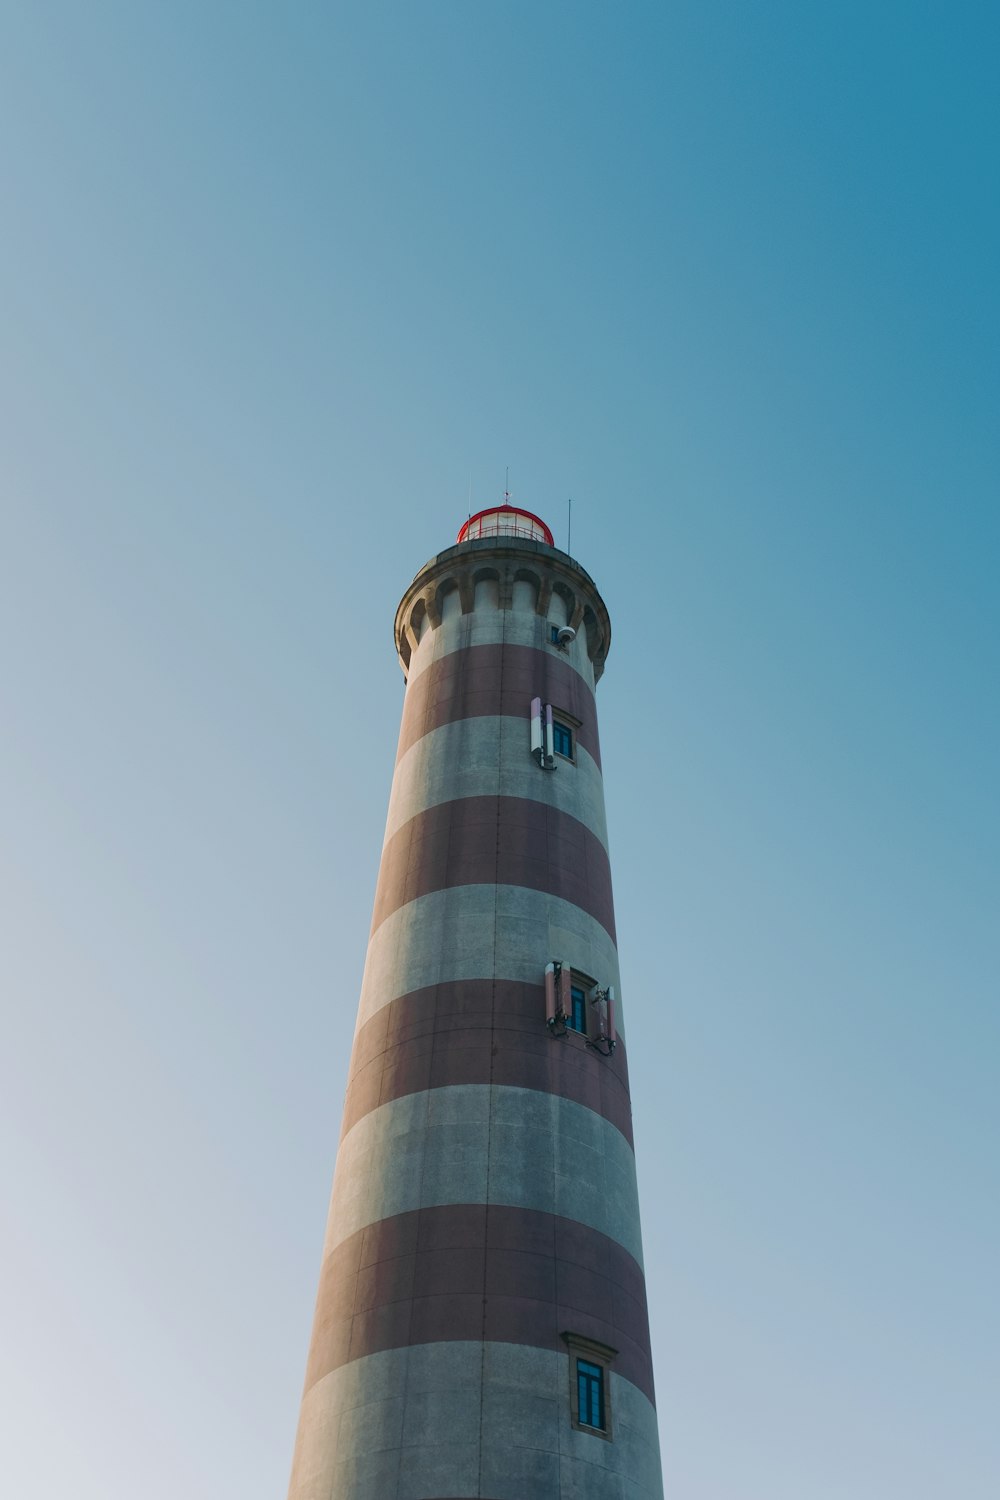 a red and white lighthouse with a blue sky in the background